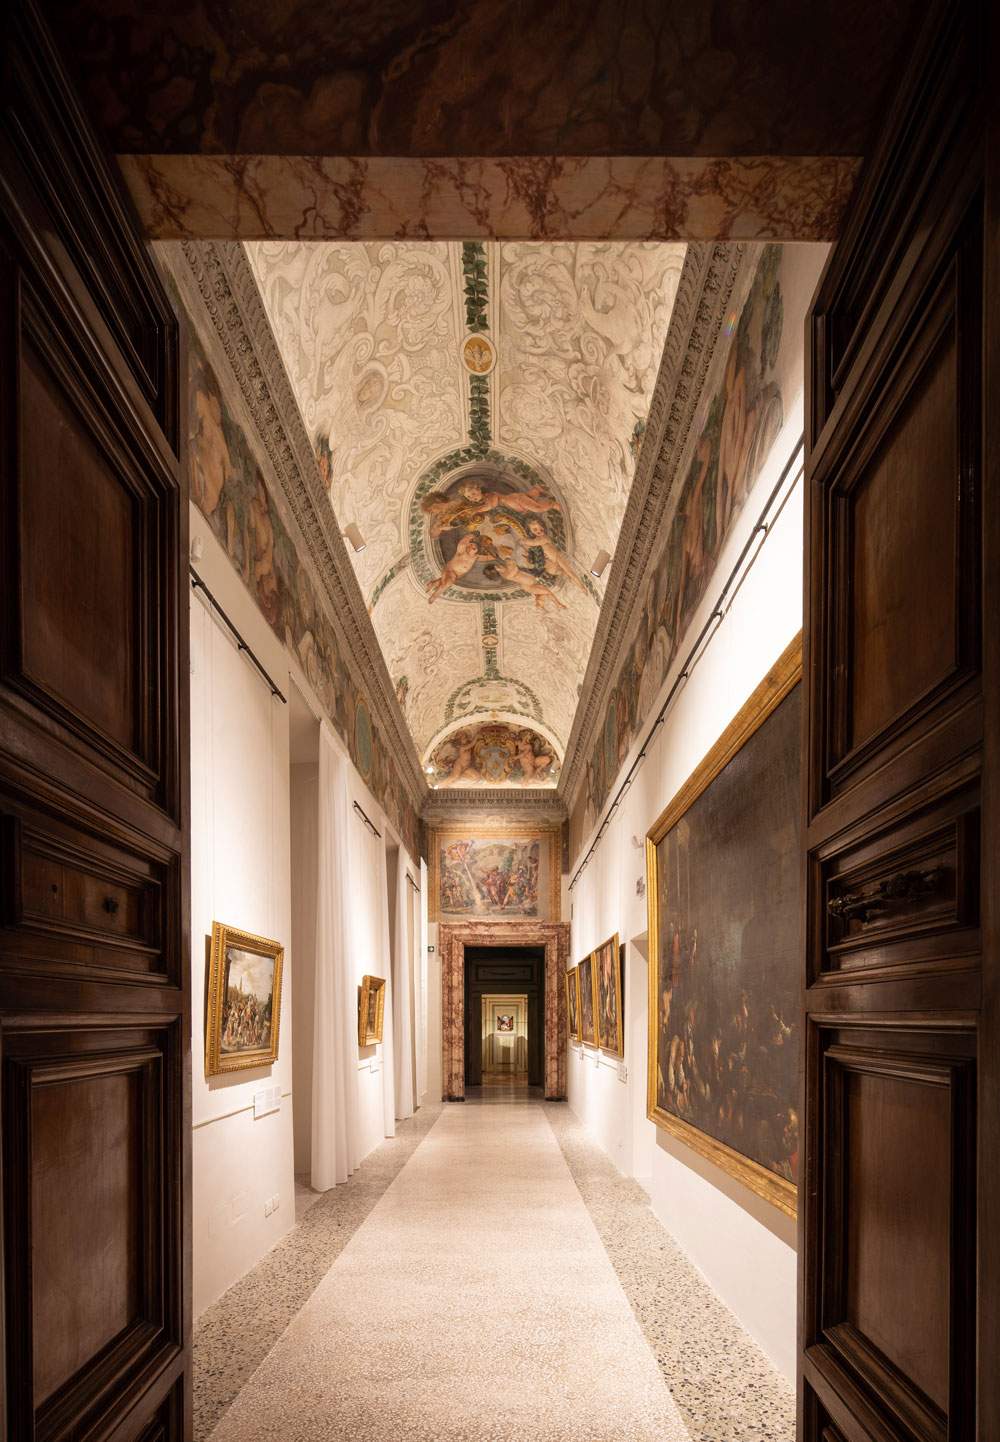 Palazzo Barberini's 17th-century rooms reopen to the public